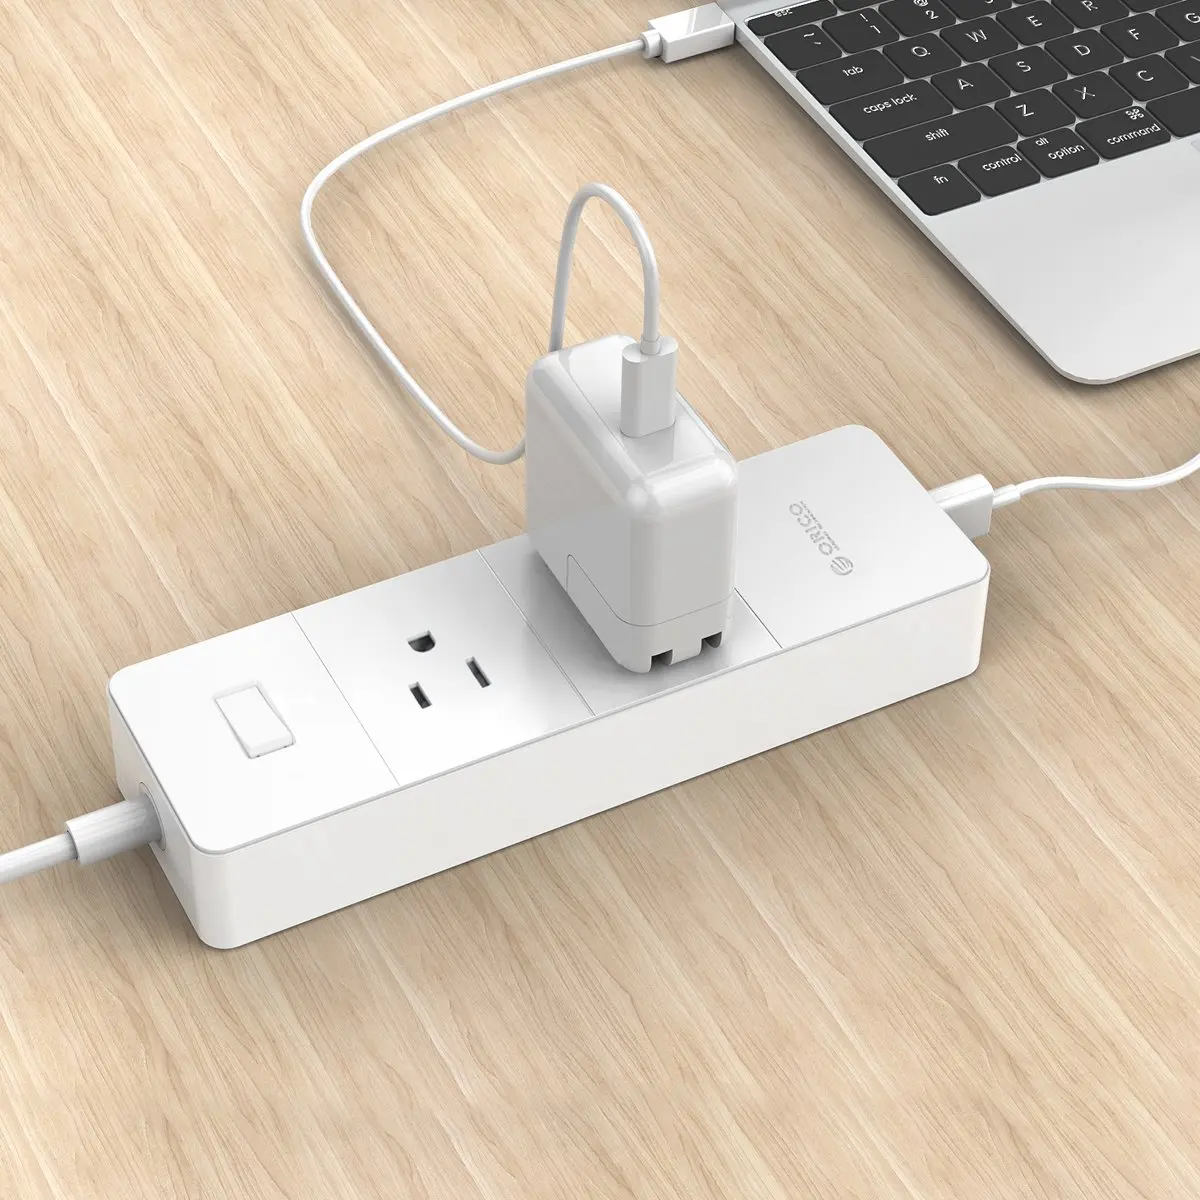 multisocket with 4 Smart USB Ports power strip with 2 Outlet Surge Protection